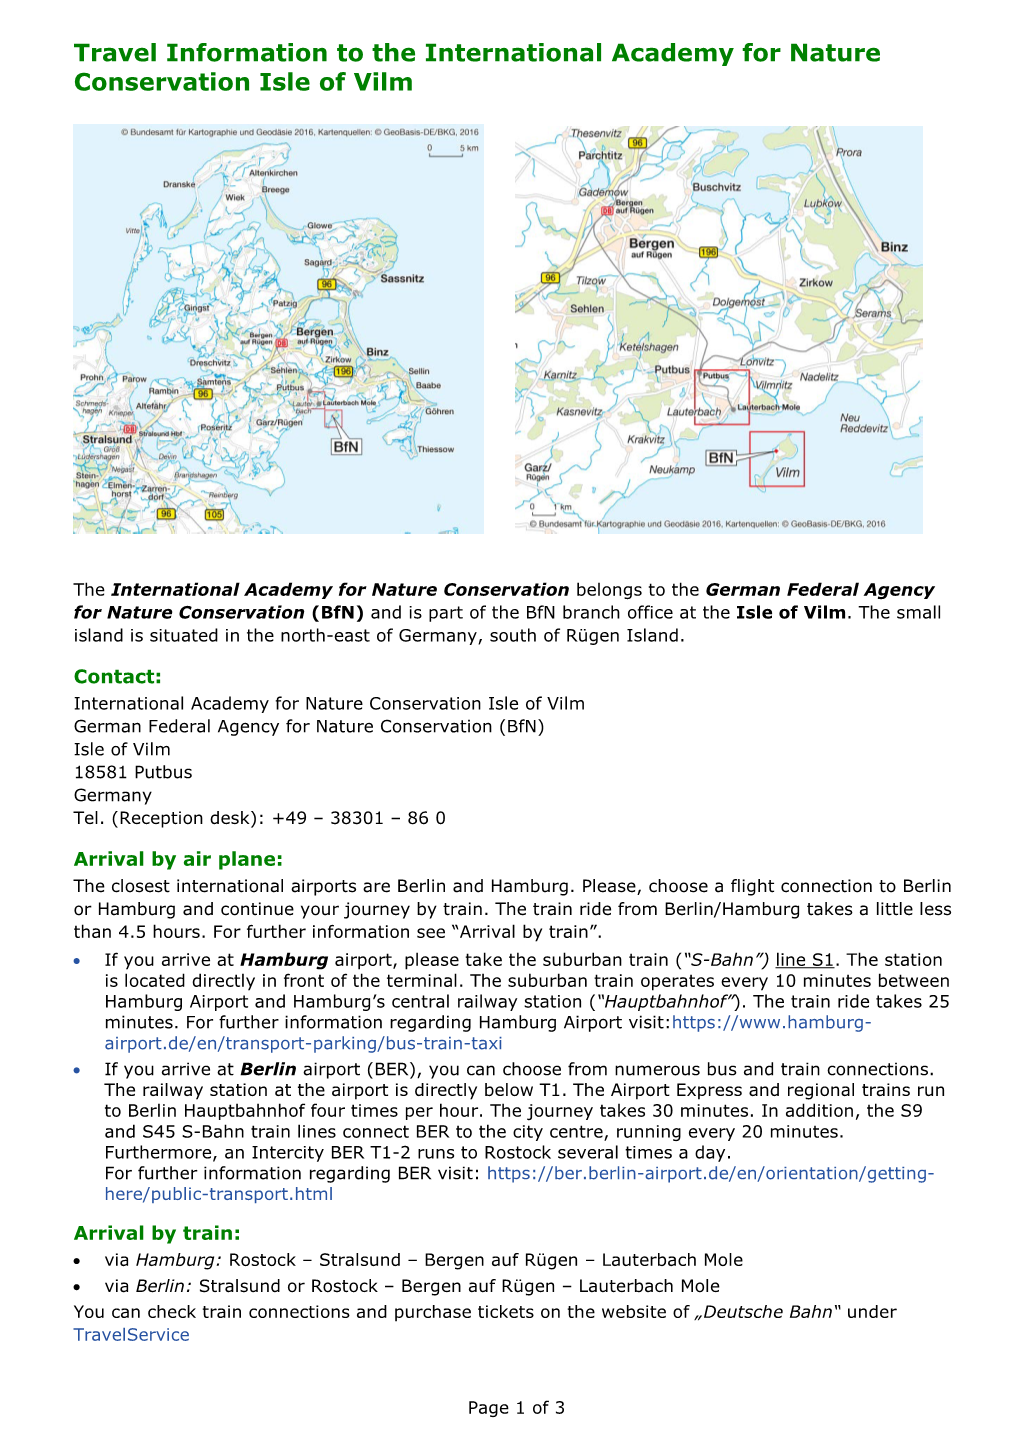 Travel Information to the International Academy for Nature Conservation Isle of Vilm